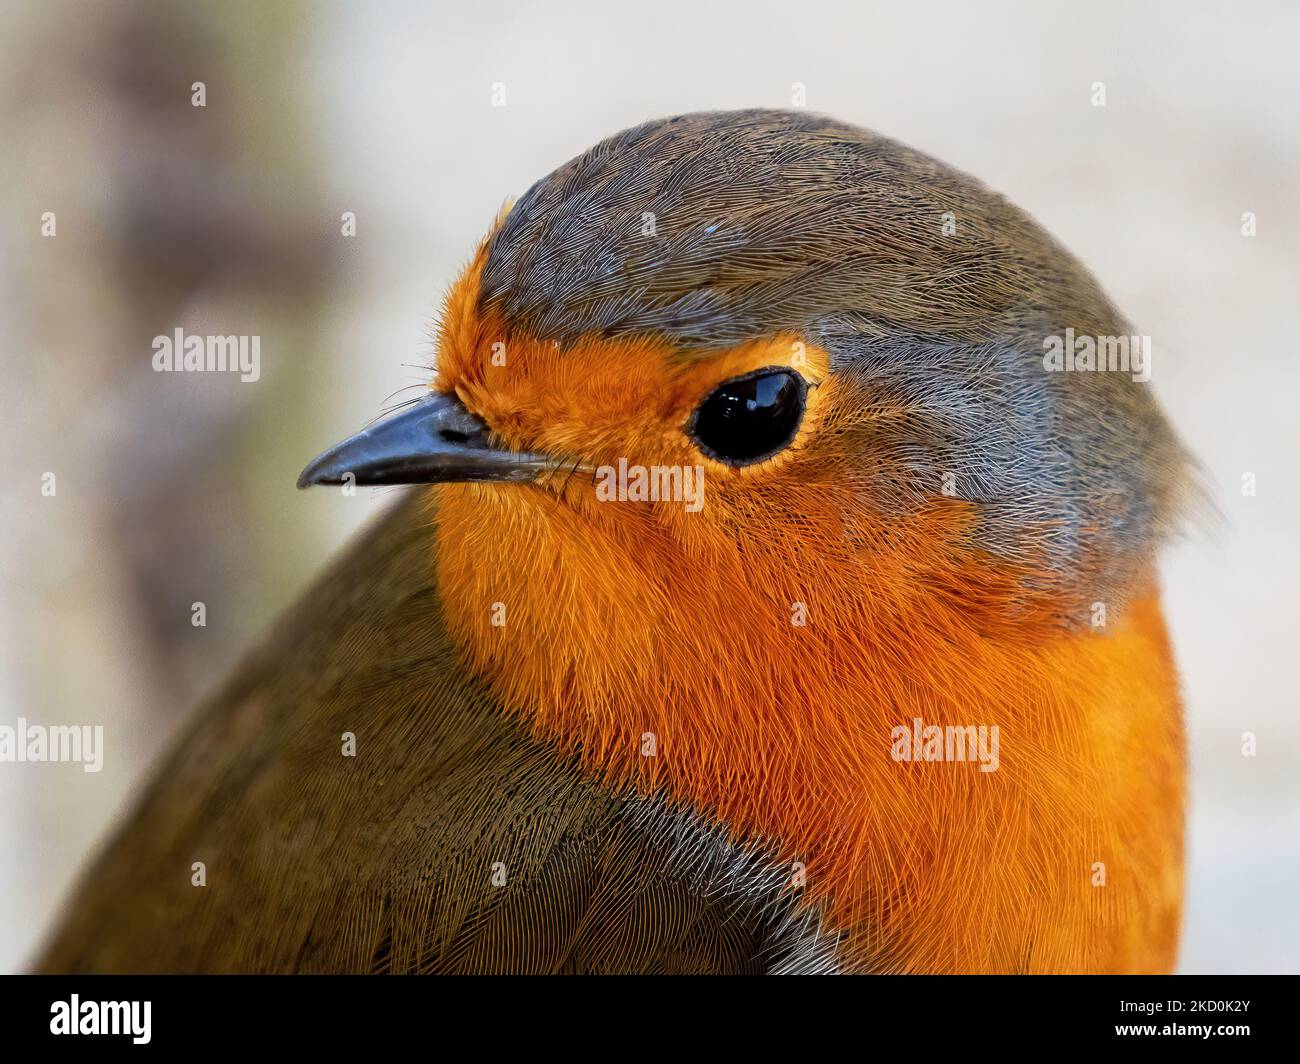 A friendly robin poses and peers into the camera, full of curiosity and interest. The bird is so close that even the texture of its feathers is visible Stock Photo